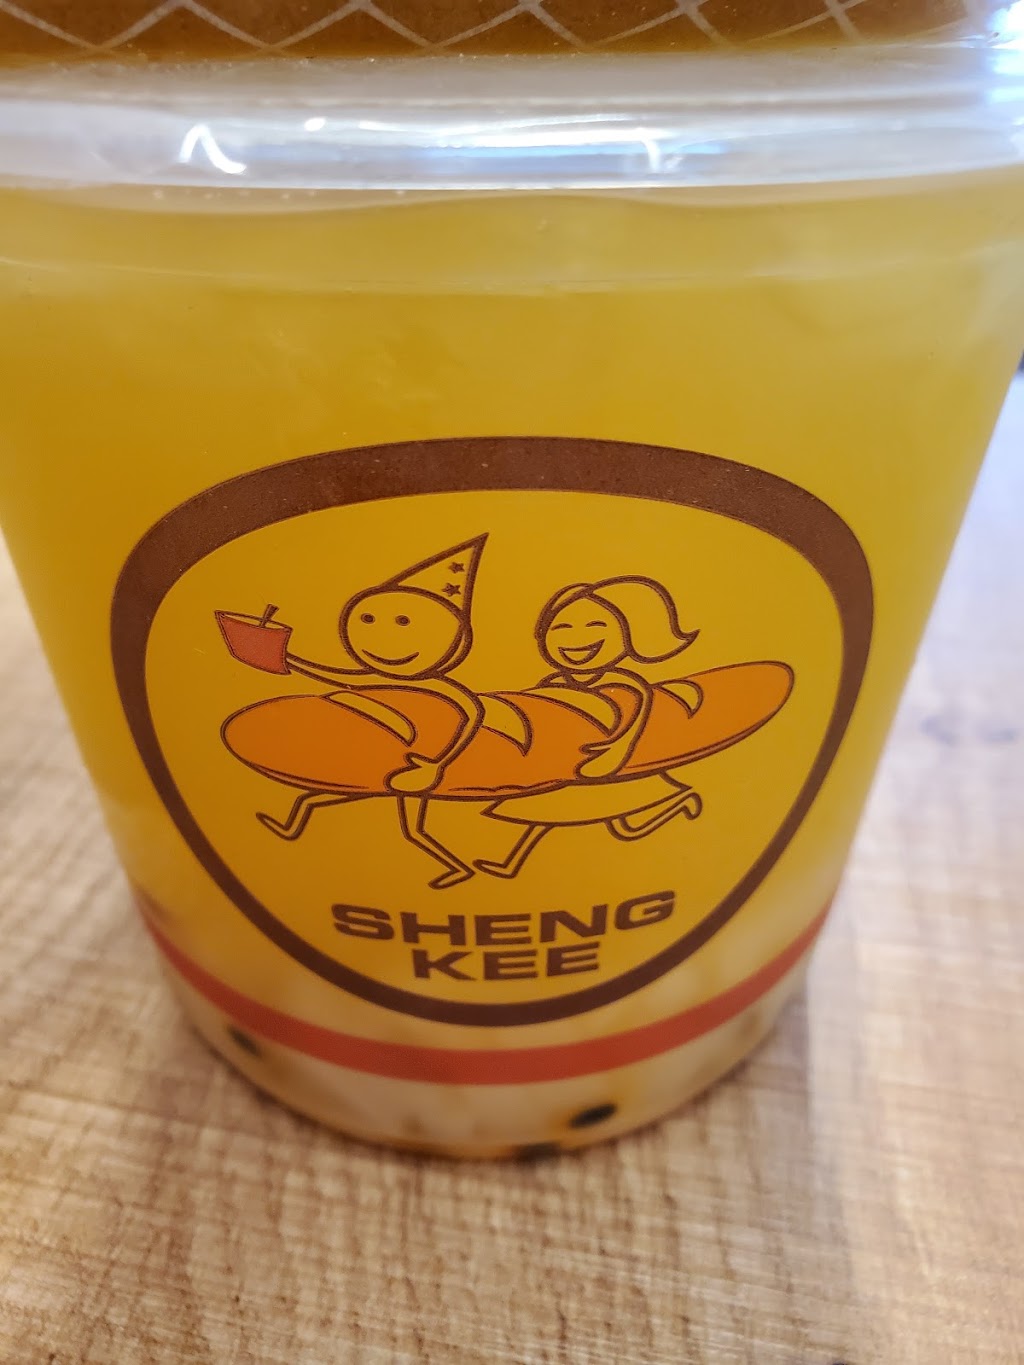 Sheng Kee Bakery Central Factory | 201 S Hill Dr, Brisbane, CA 94005 | Phone: (415) 468-3800